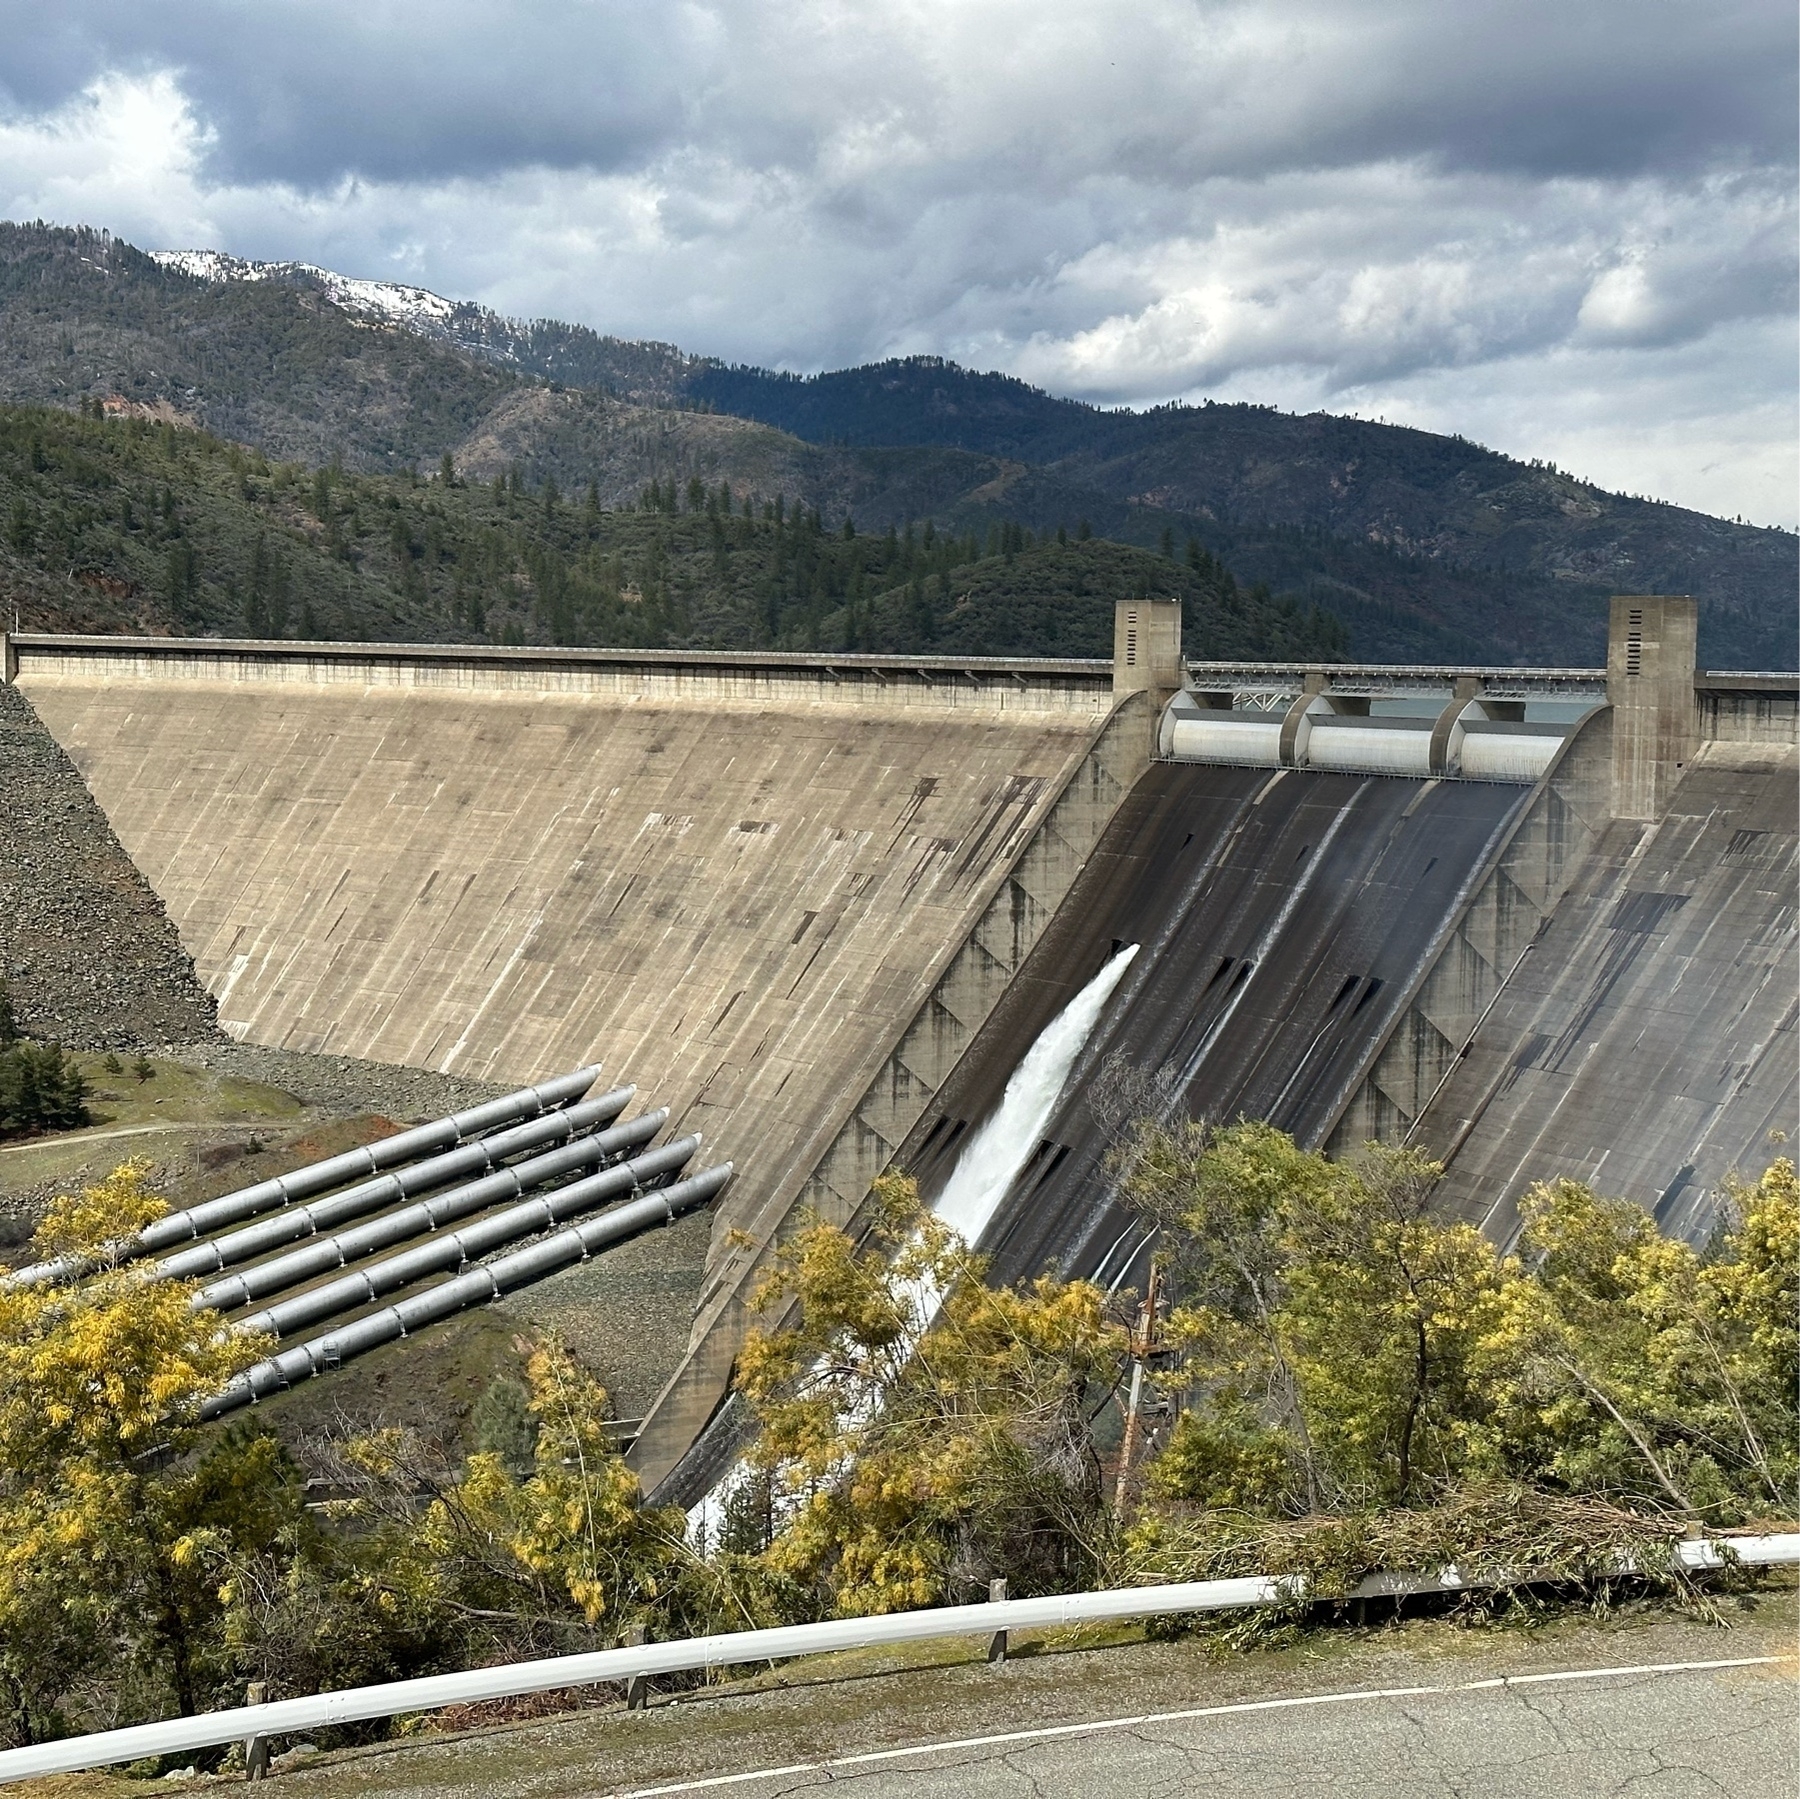 The massive shasta dam with snow capped mountains in the background. A spillway gate appears to be open, sending an enormous amount of water into the Sacramento River. It is an overcast day.